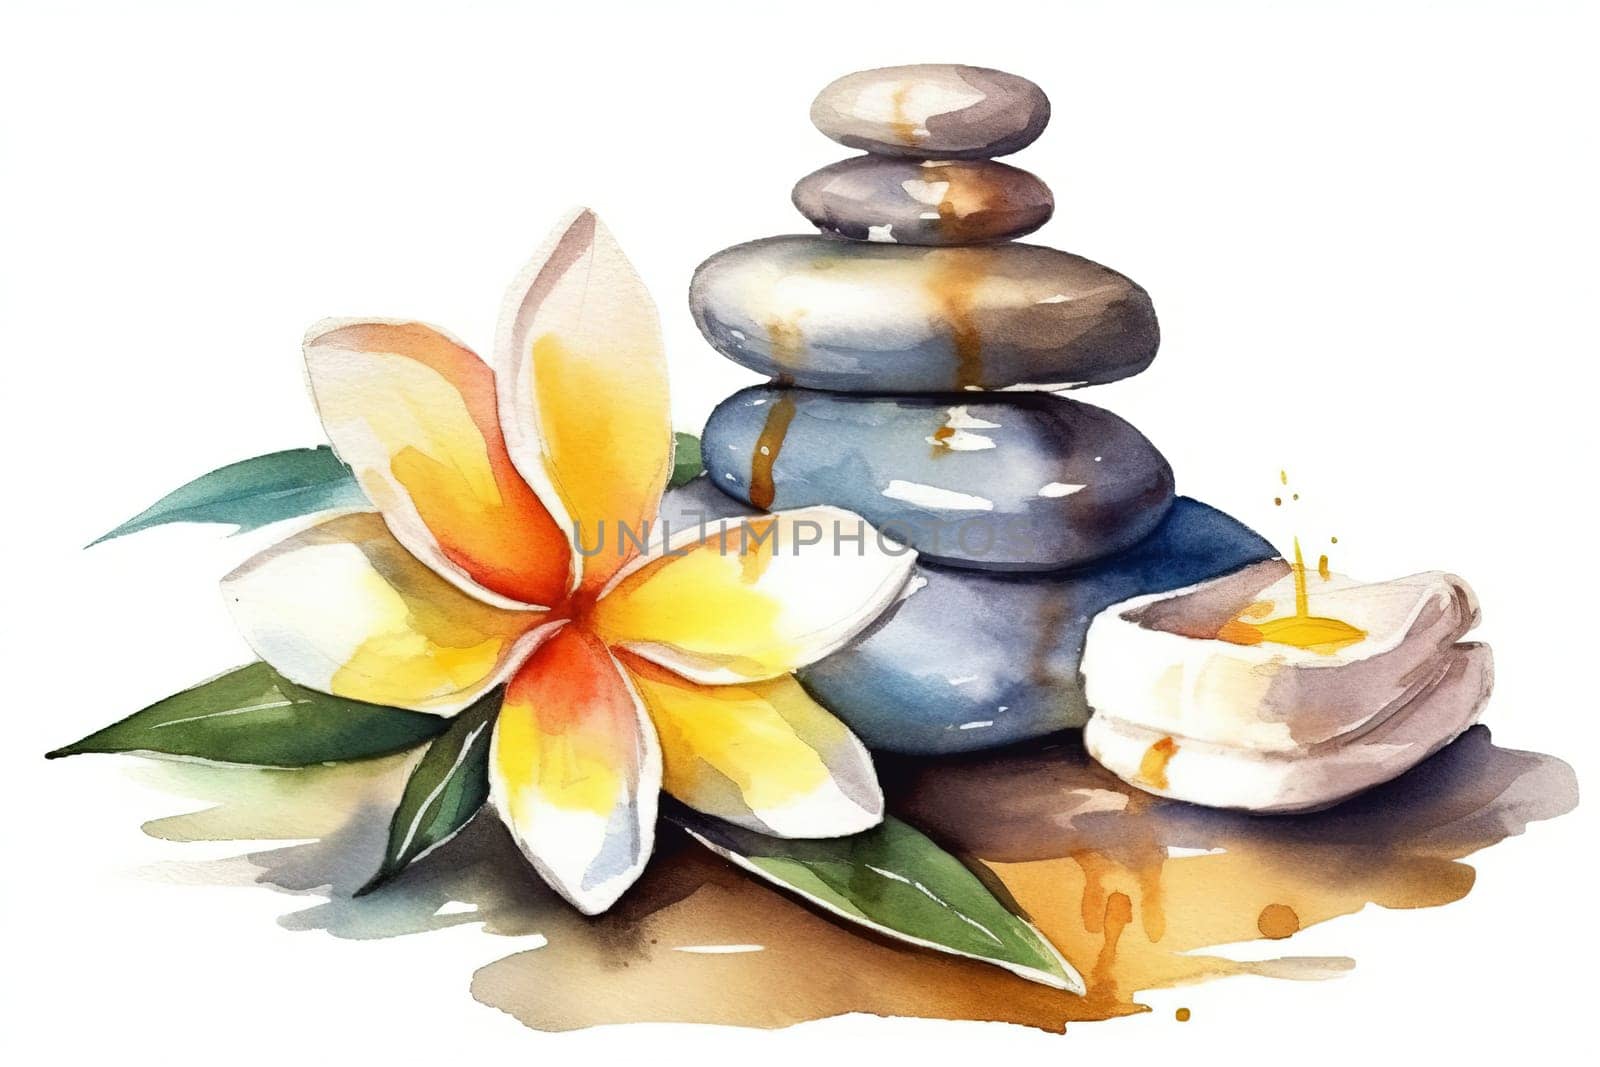 Watercolor Illustration Of Sp Massage Stones With Flowers by GekaSkr